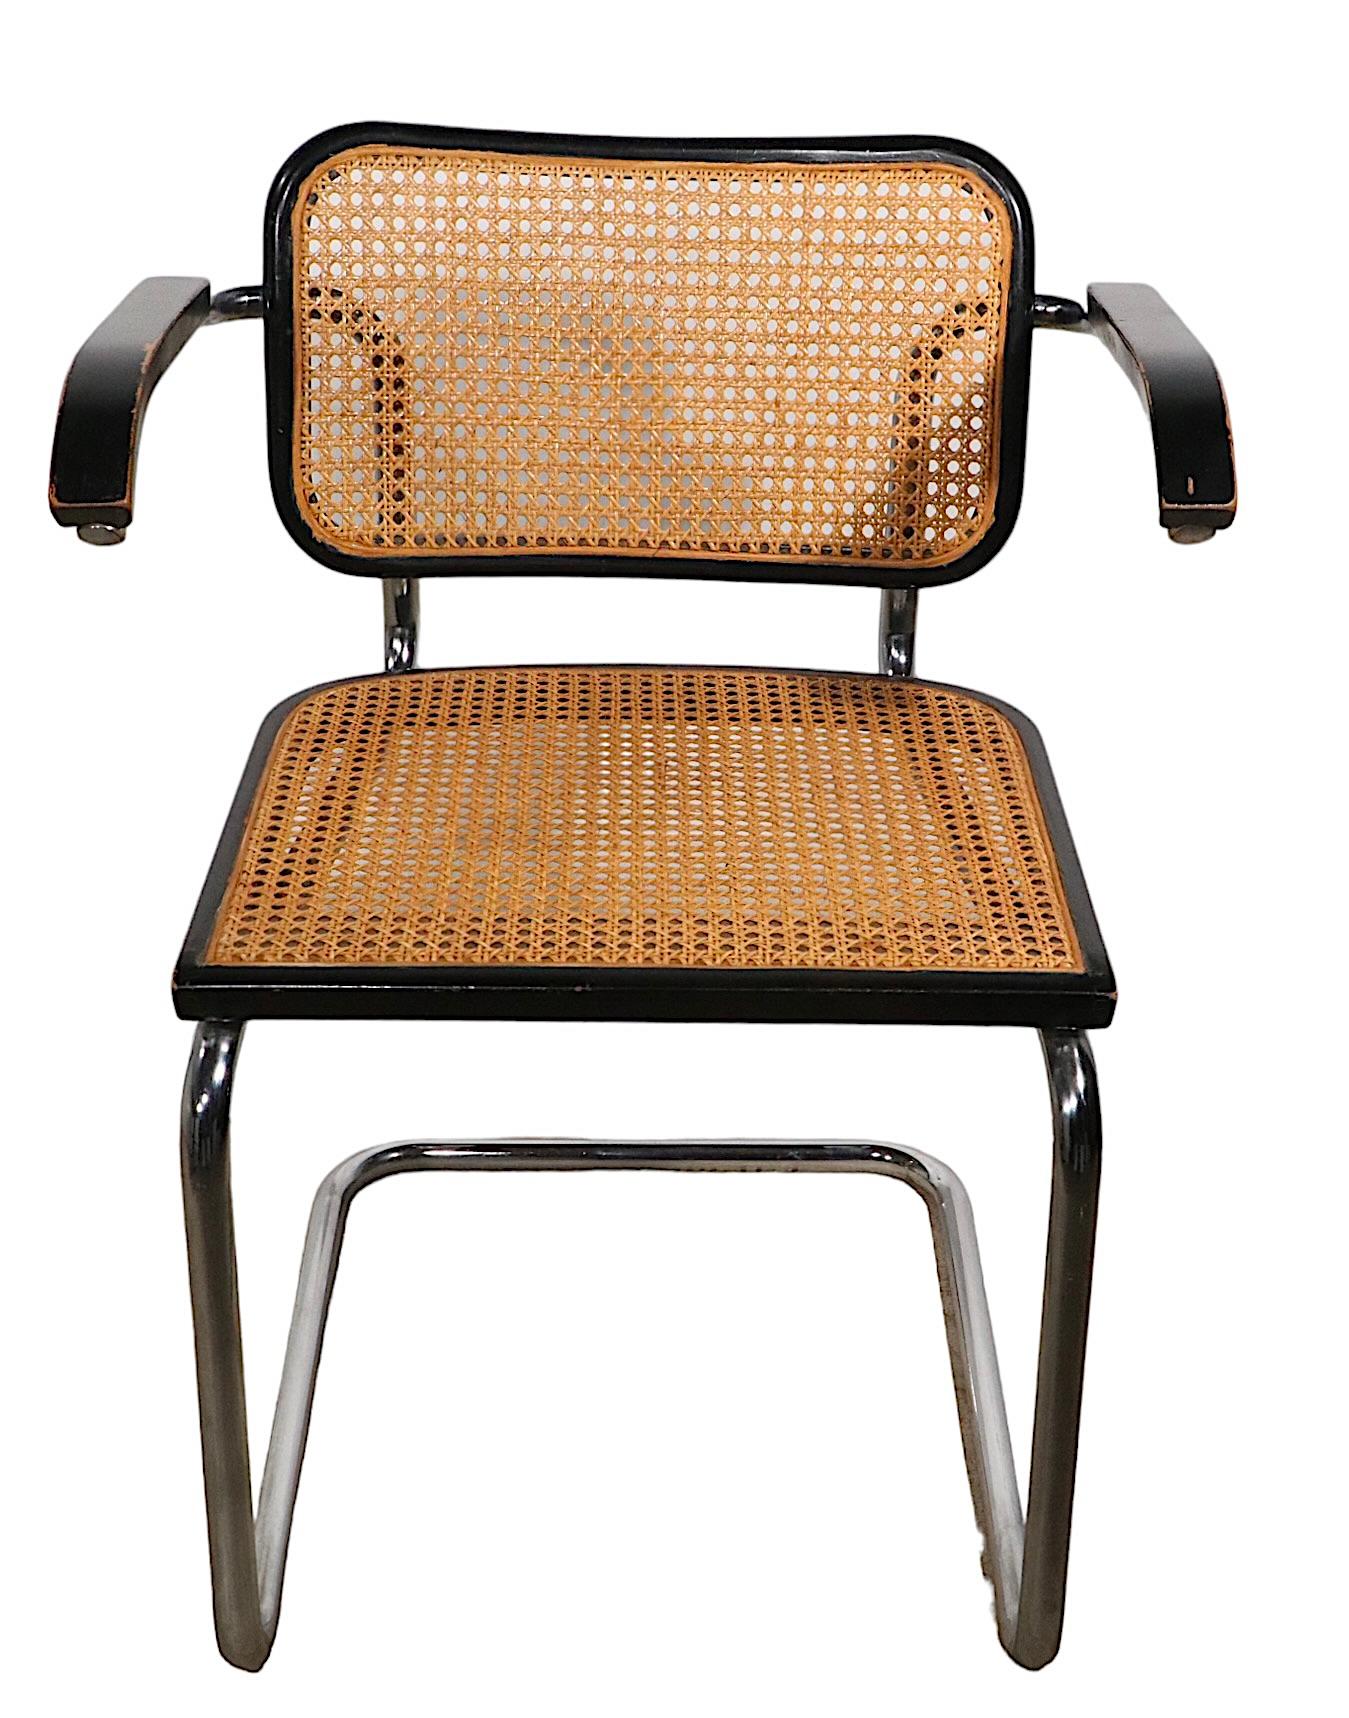 International Style Chrome and Black Cesca Chair Designed by Marcel Breuer Made in Italy circa 1970s For Sale